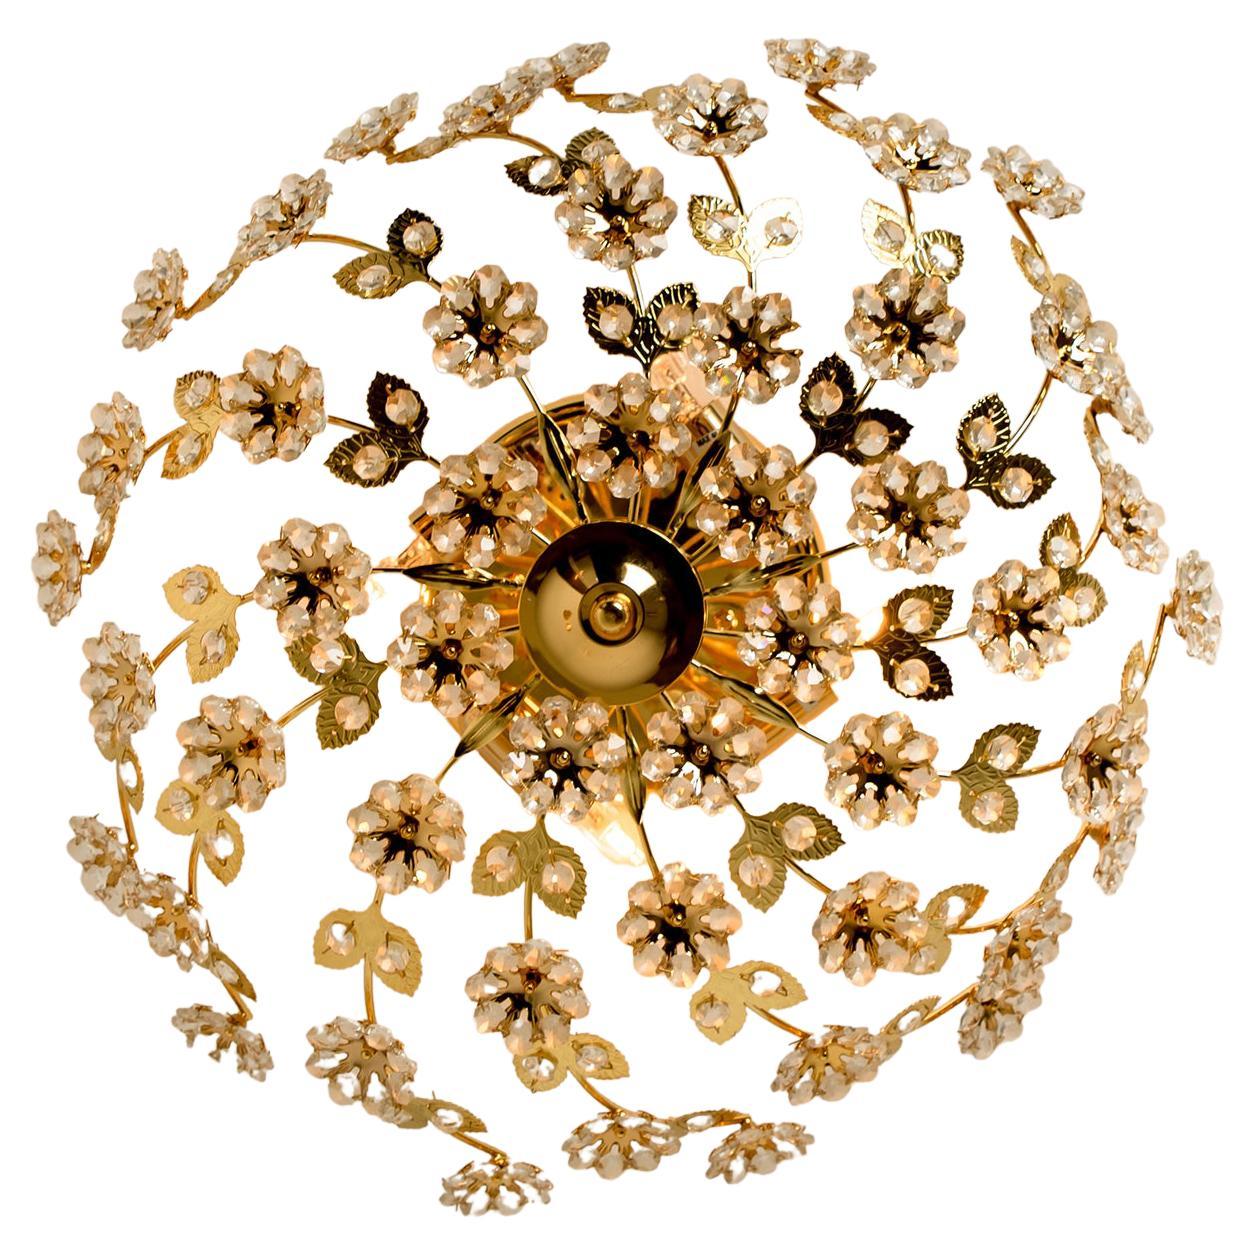 Stunning flower wall light/ flush mount by Palwa, Germany, circa 1965-1975.
A luxurious of light fixture with beautifully cut flower and leaves crystals on a gold-plated brass frame.

In very good vintage condition. Cleaned, well wired and ready